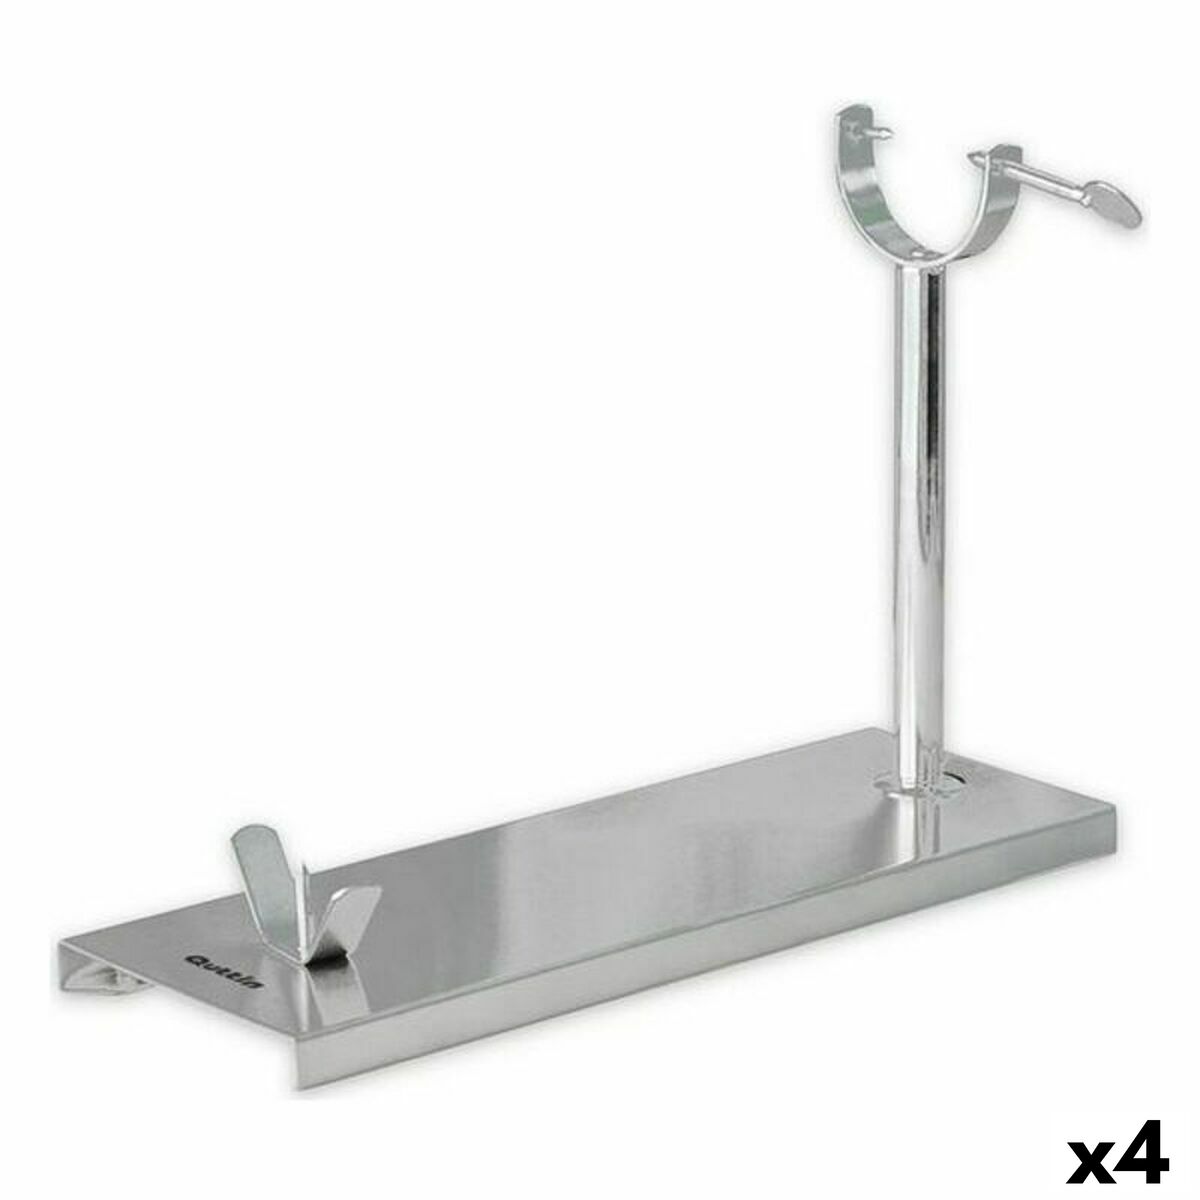 Stainless Steel Ham Stand (support for whole leg of ham) Quttin 108689 (49 x 16 x 3 cm) (4 Units)